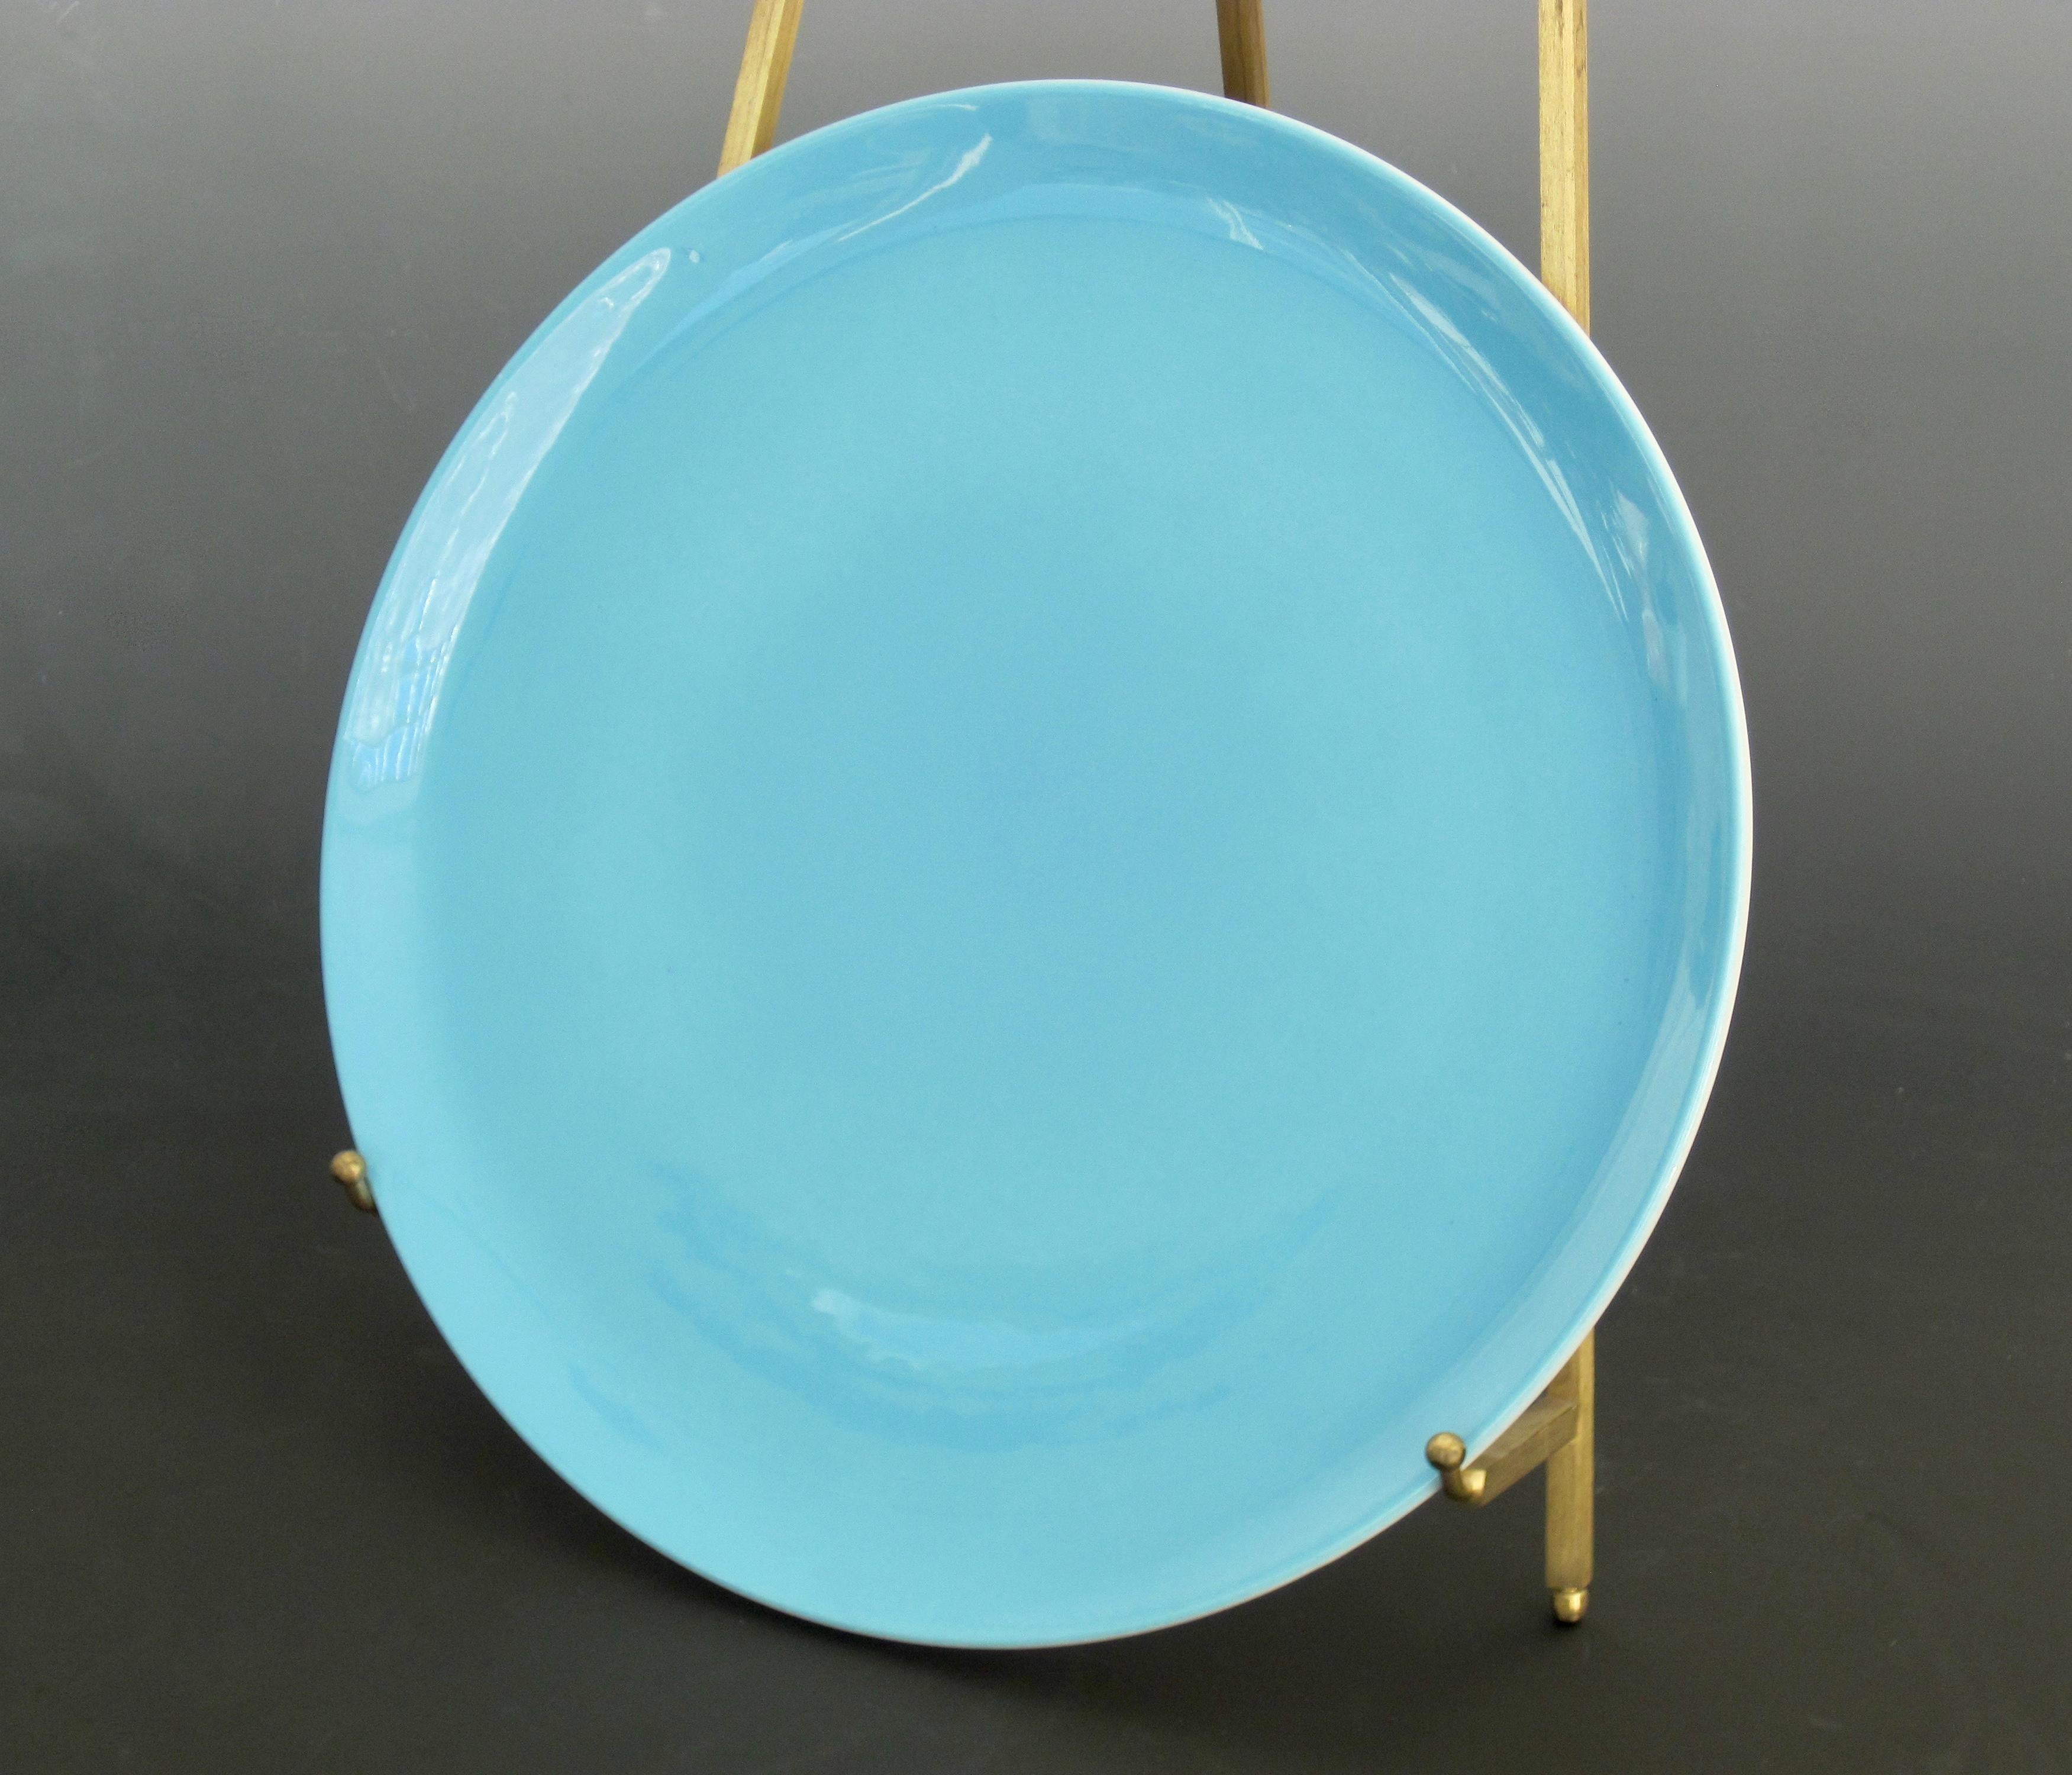 Lagardo Tackett for Schmid, Four Plates in Ironstone, Forma Blue, Ovenproof In Good Condition For Sale In Ferndale, MI